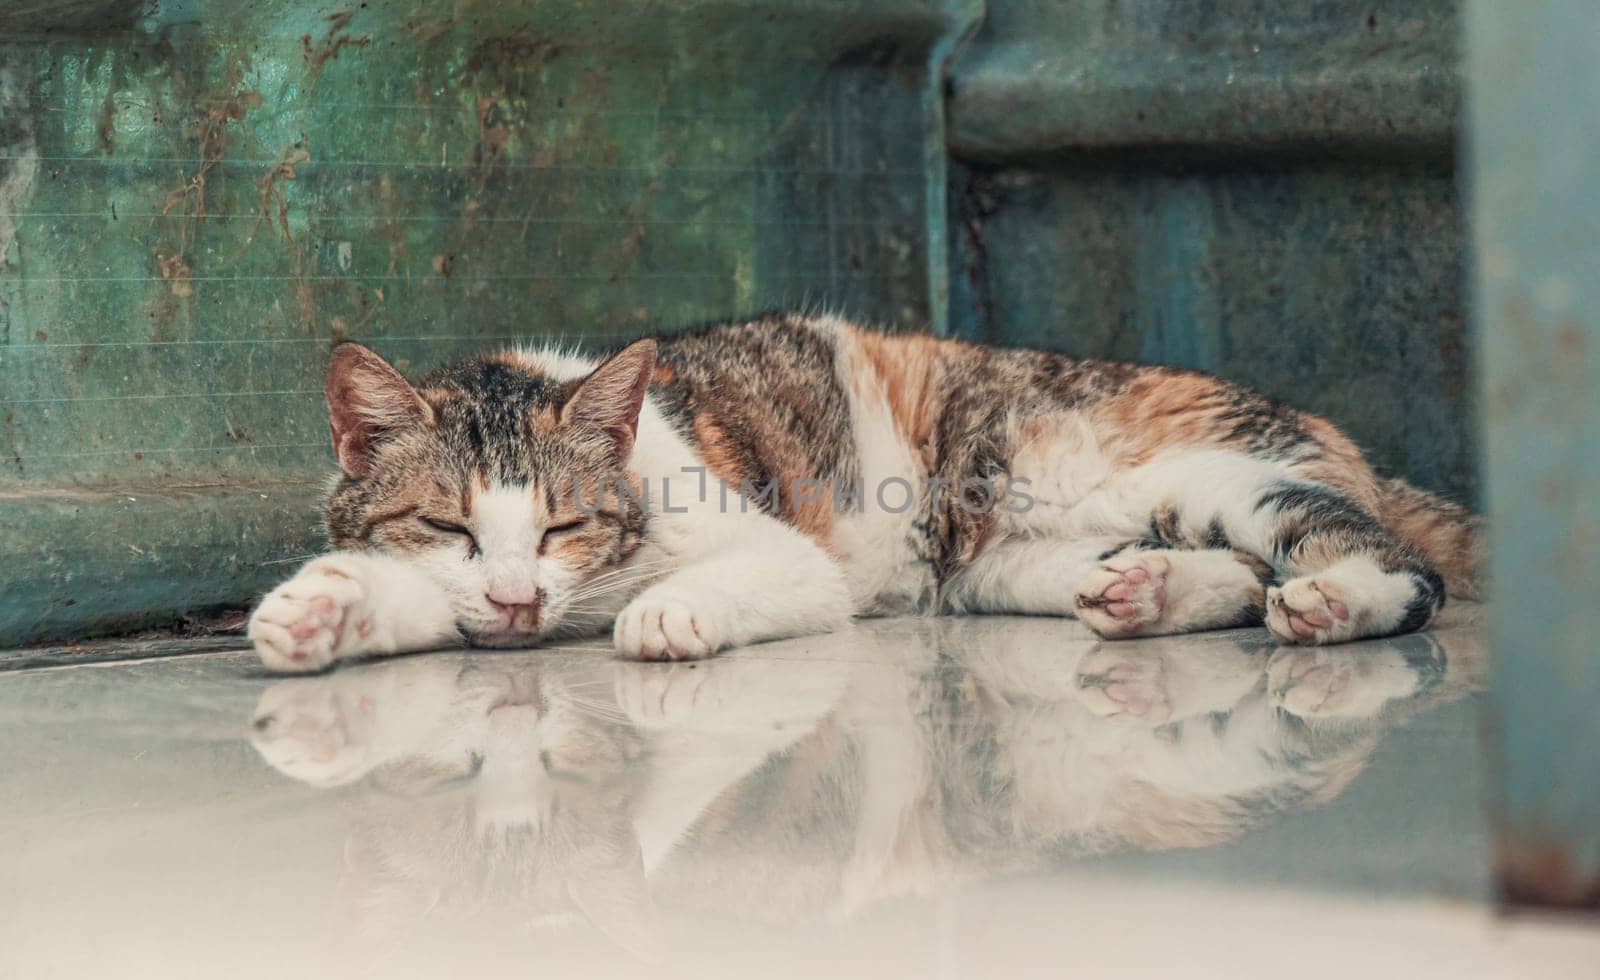 Cat pound. Close-up shot of homeless stray cat living in the animal shelter. Shelter for animals concept by Busker